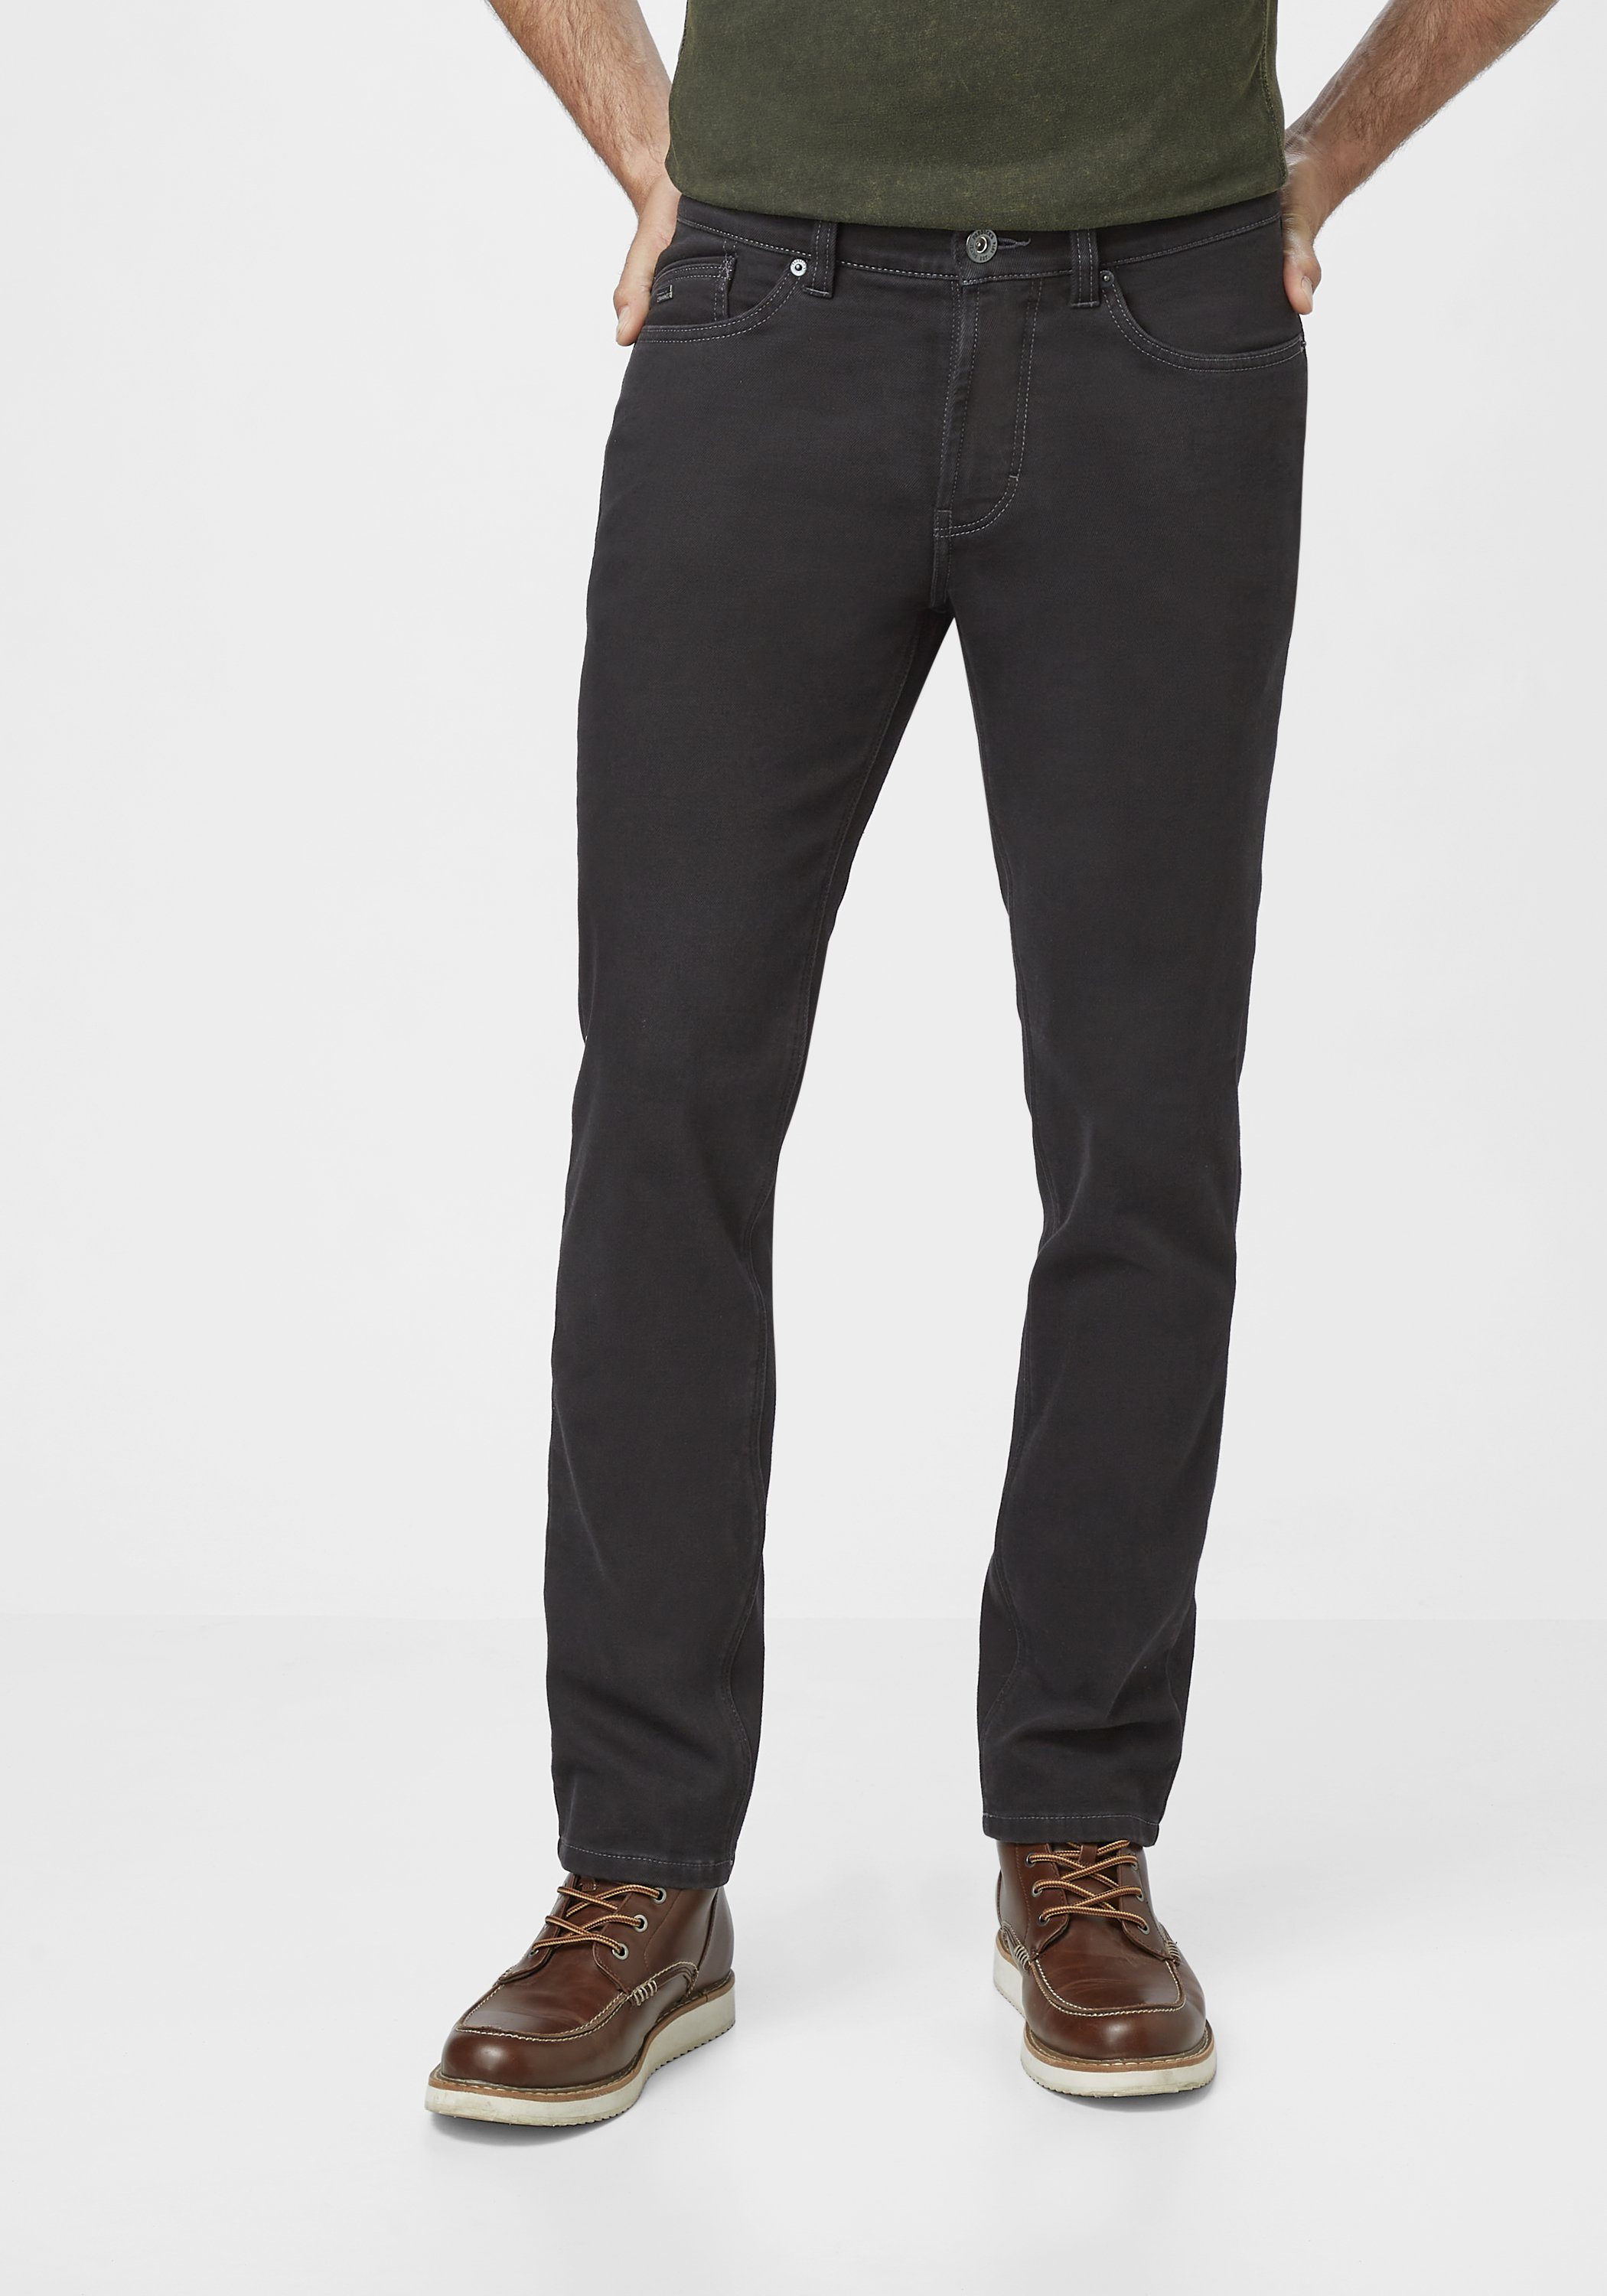 Paddock's Slim-fit-Jeans mit und PIPE Jeans Thermo-Funktion Stretch 5-Pocket RANGER